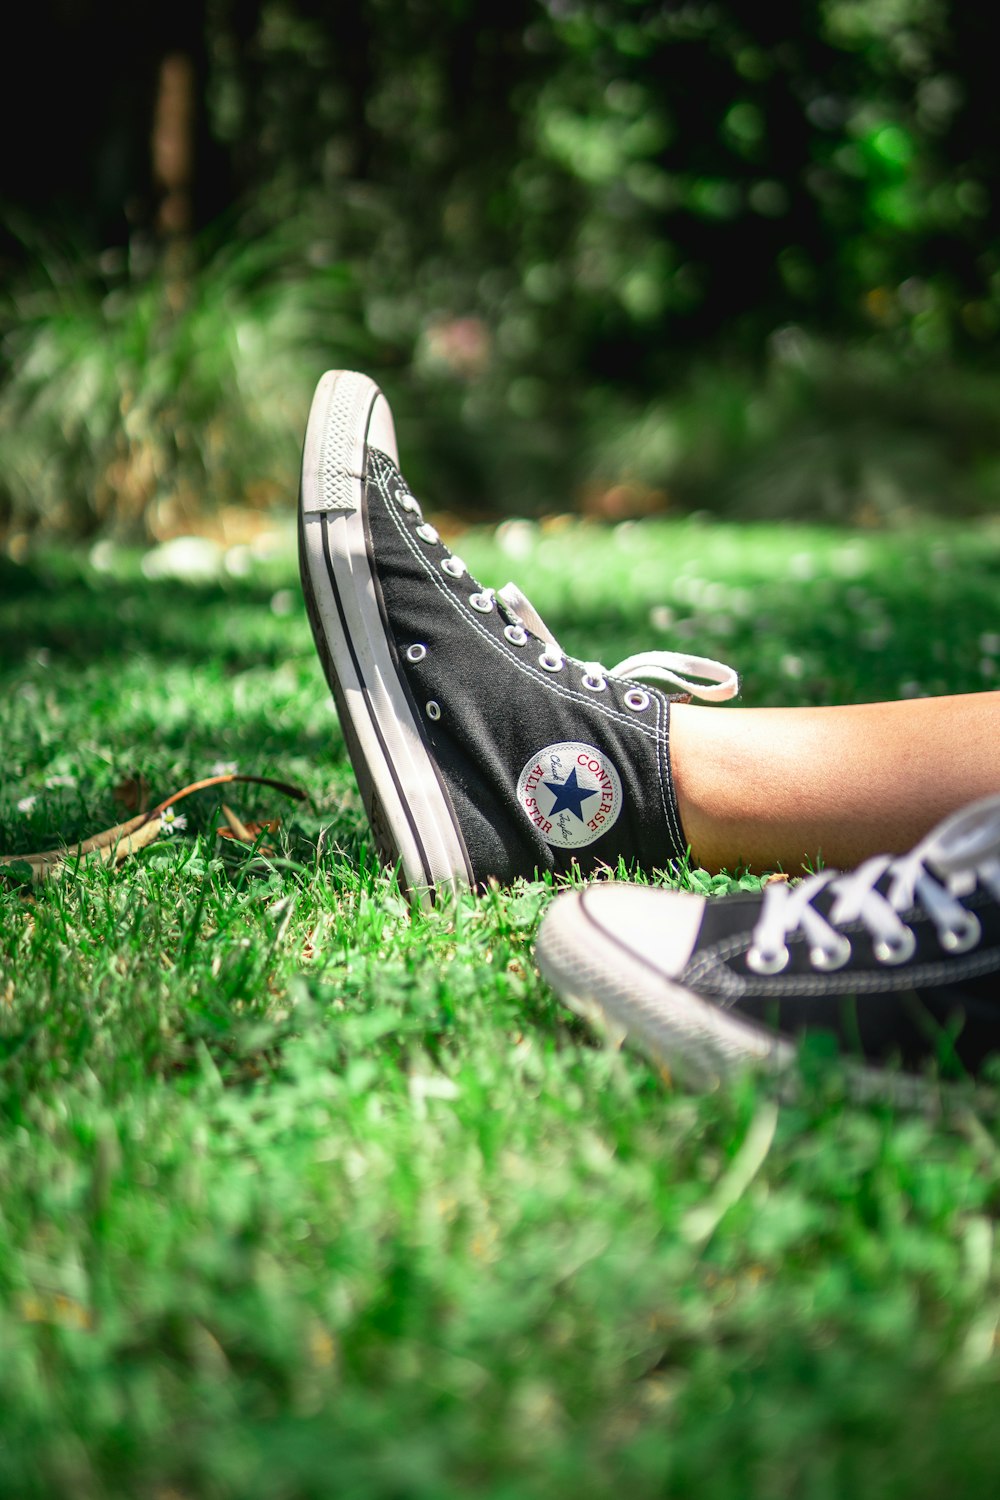 Black converse all star high-top shoes photo – Free New zealand Image on  Unsplash